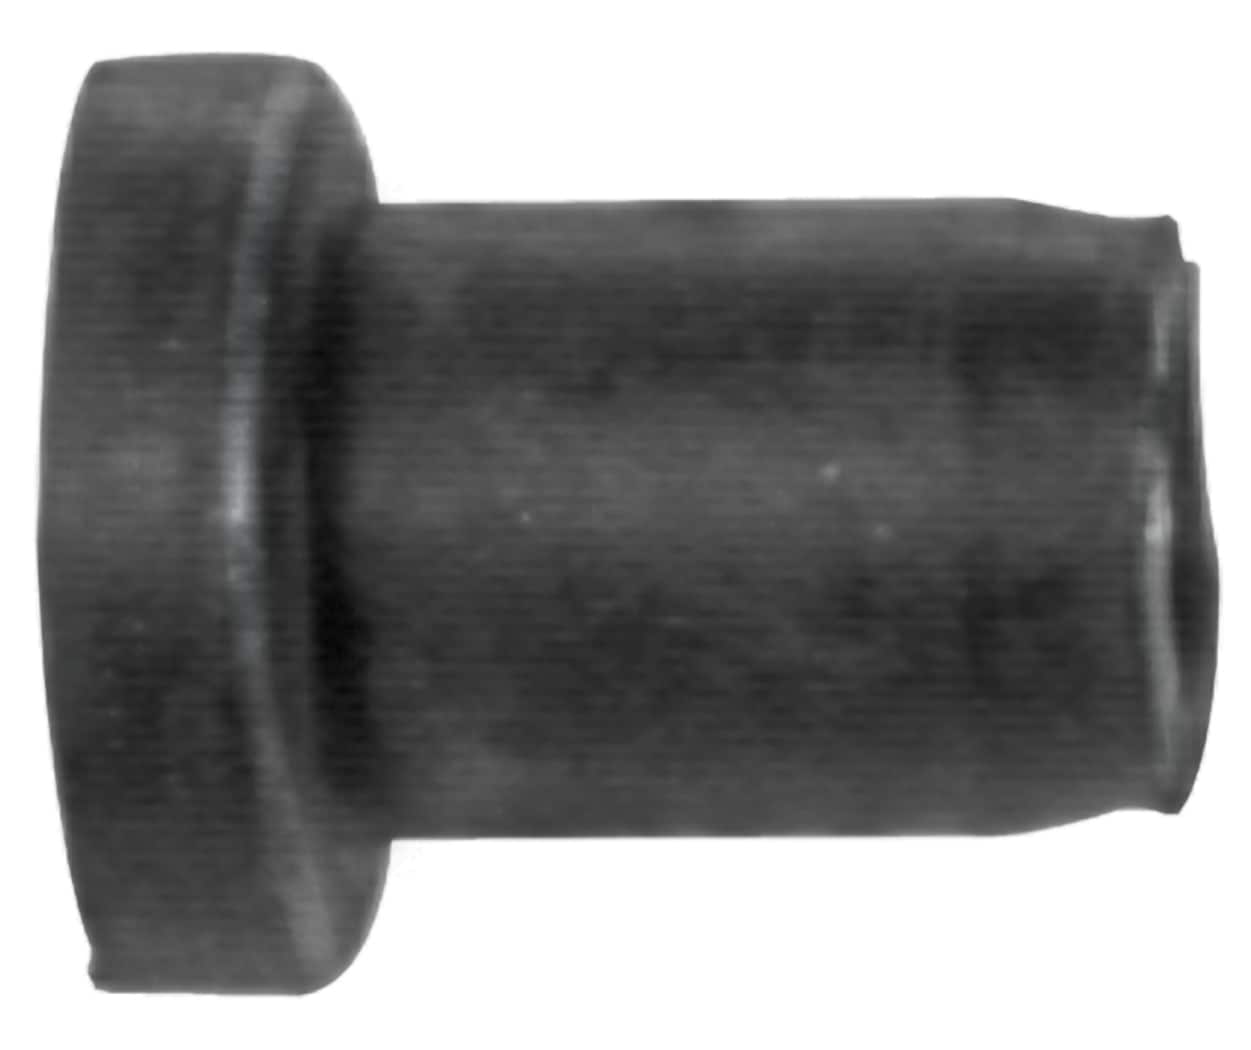 Fixed Rivet Nut Anchor Nut 1/4-20 T Nut W/ Mounting Rivets 10-Pack 